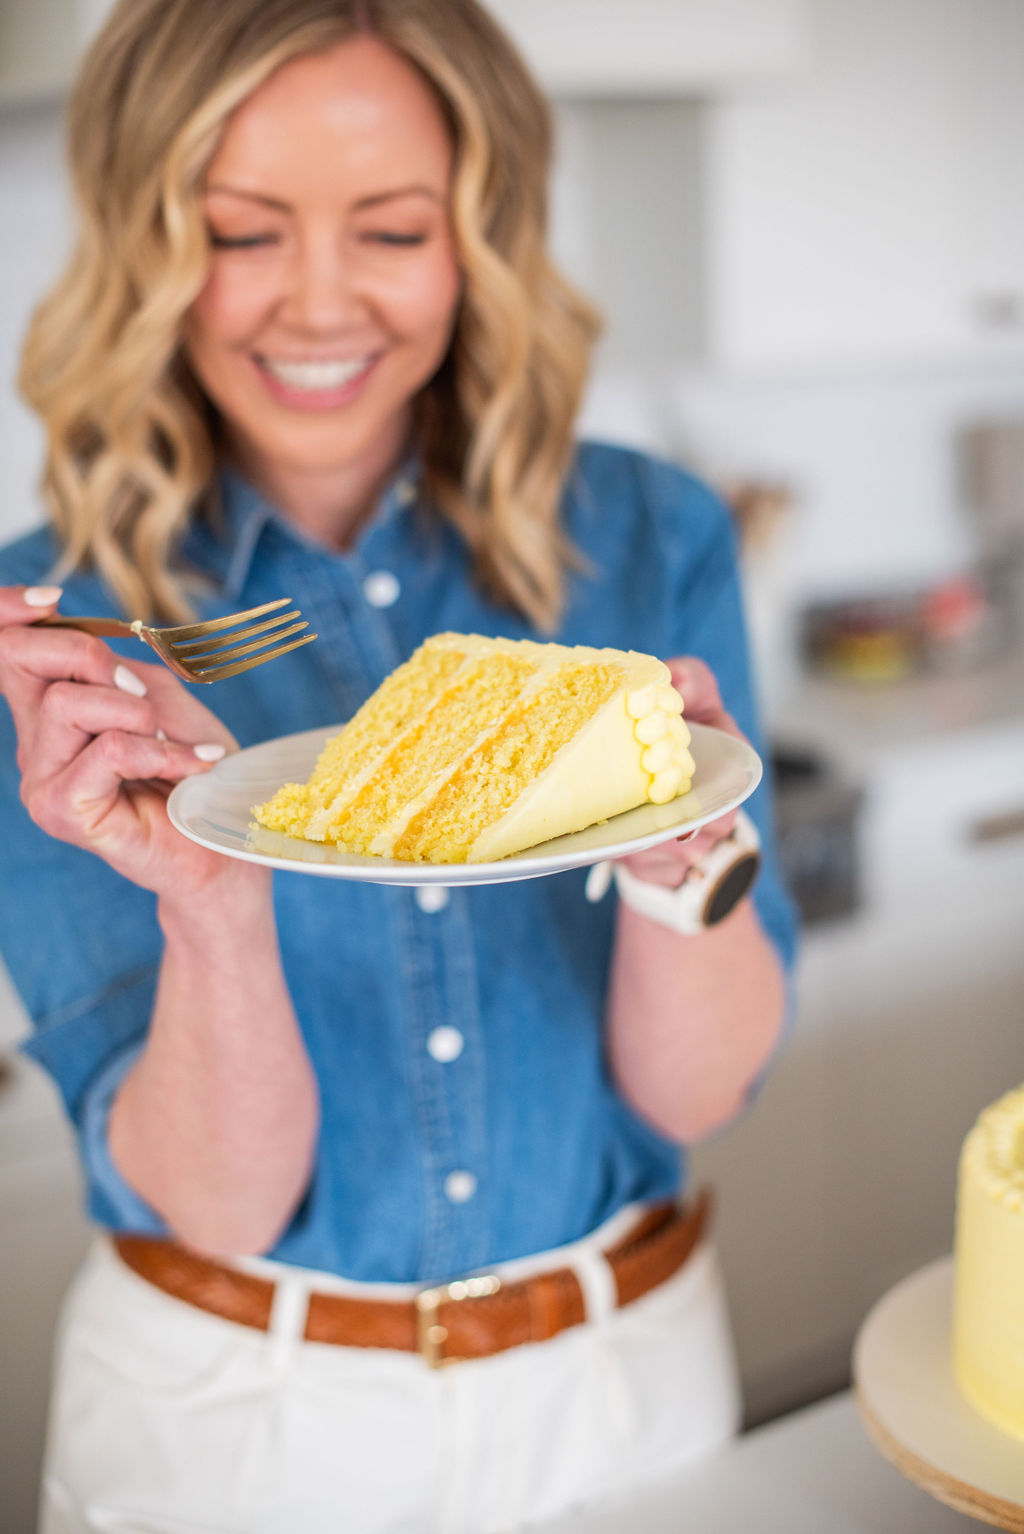 Woman holding a plate of cake.